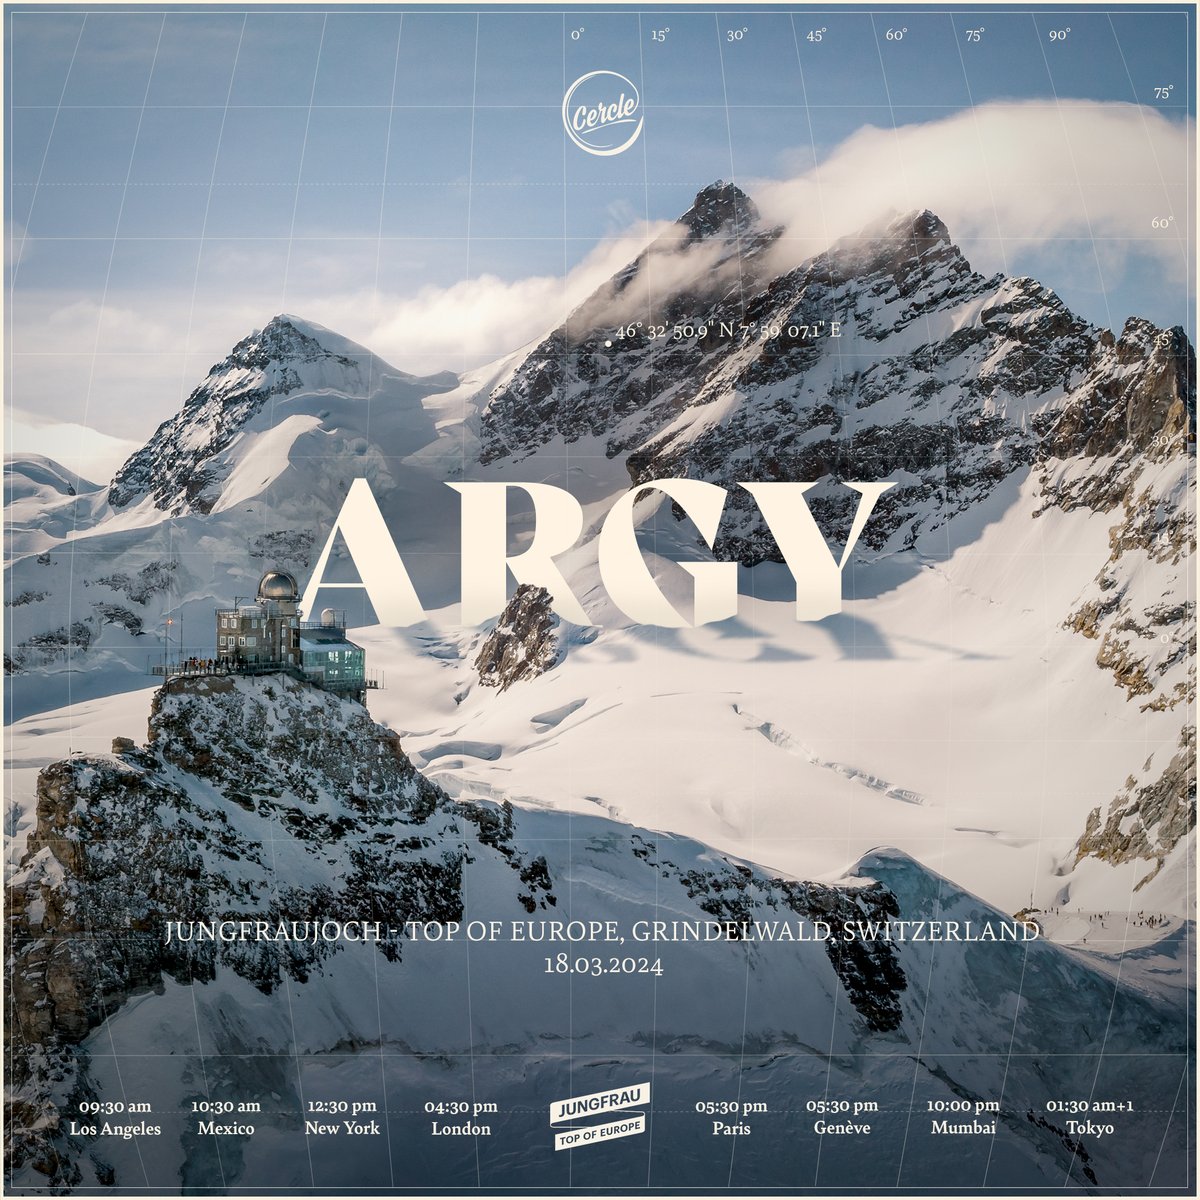 Countdown is on for our first 2024 Show on top of Europe → Argy at #jungfraujochtopofeurope Let's meet on March 18 at one of the highest observatories in the world for an astronomical performance in Switzerland! Pre-register here: Cercle.lnk.to/PreRegistratio…